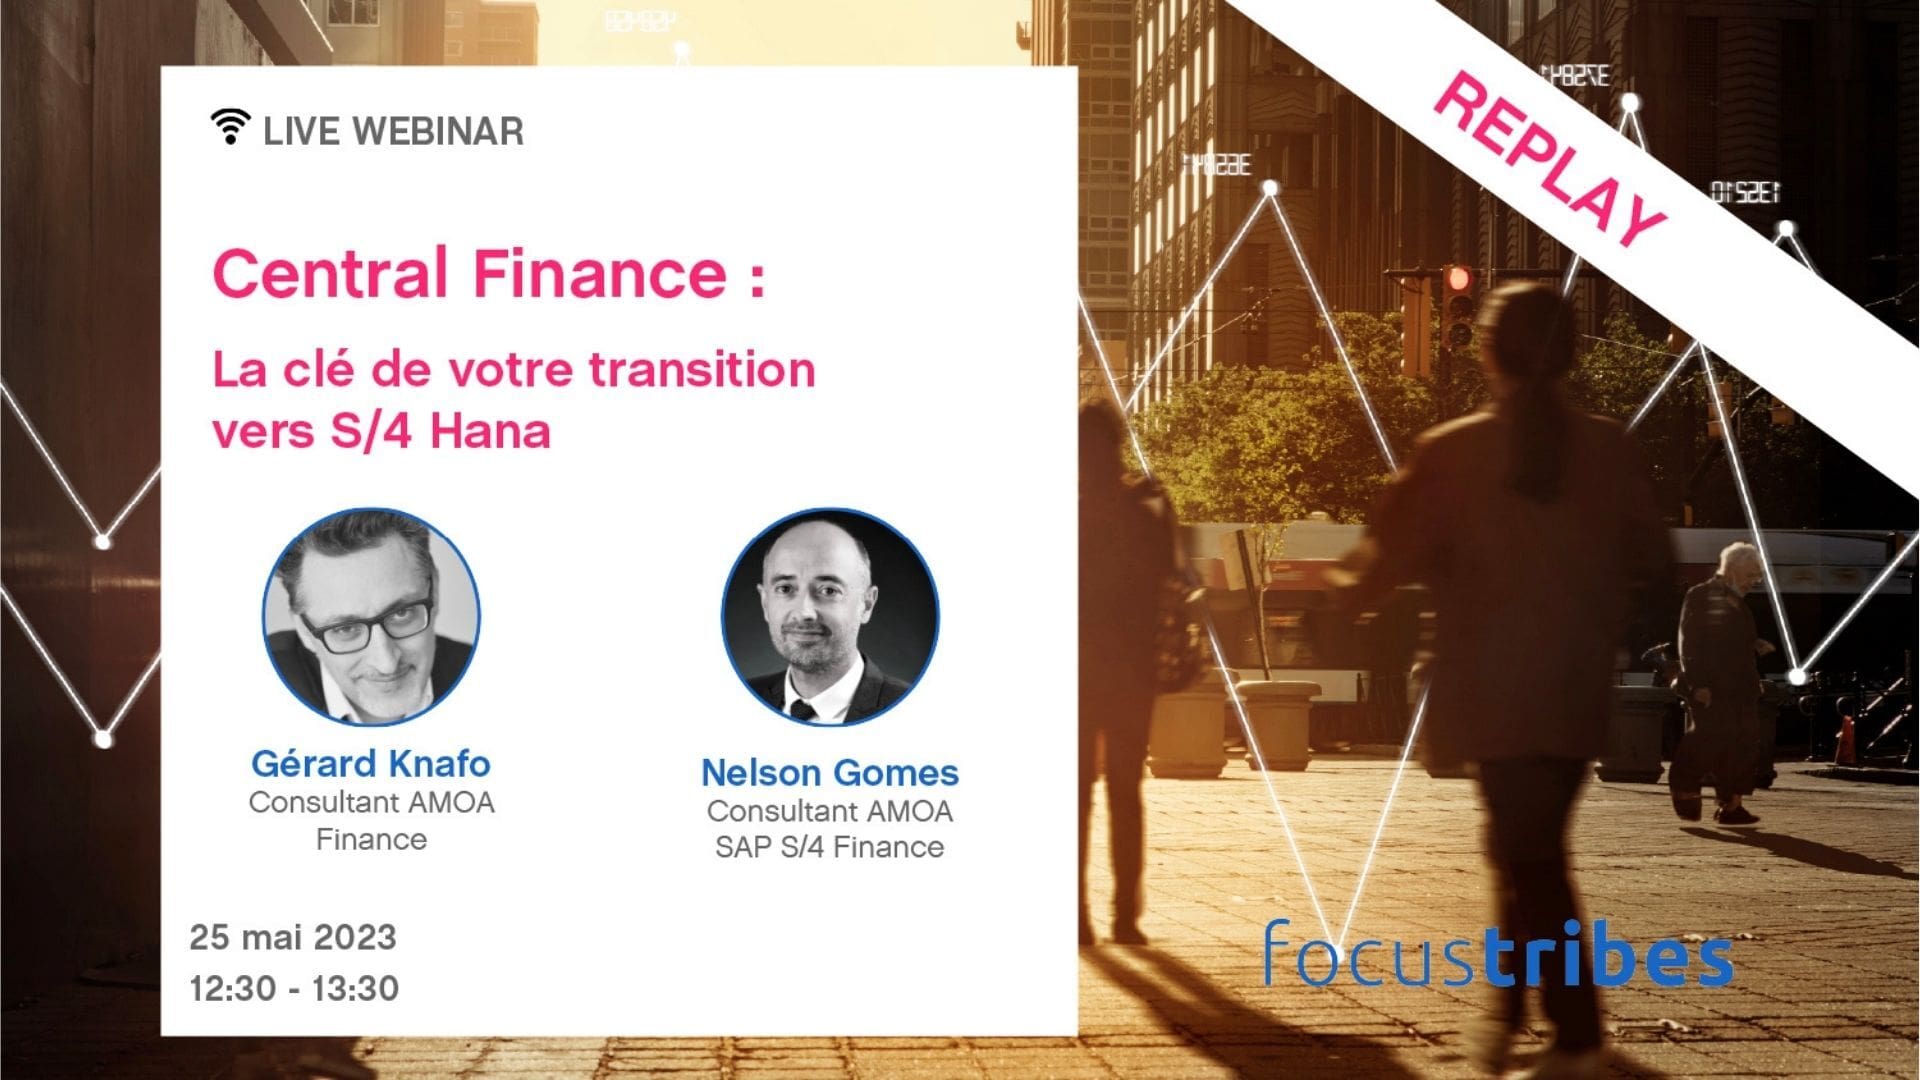  REPLAY WEBINAR : Central Finance, key to your transition to S4Hana
